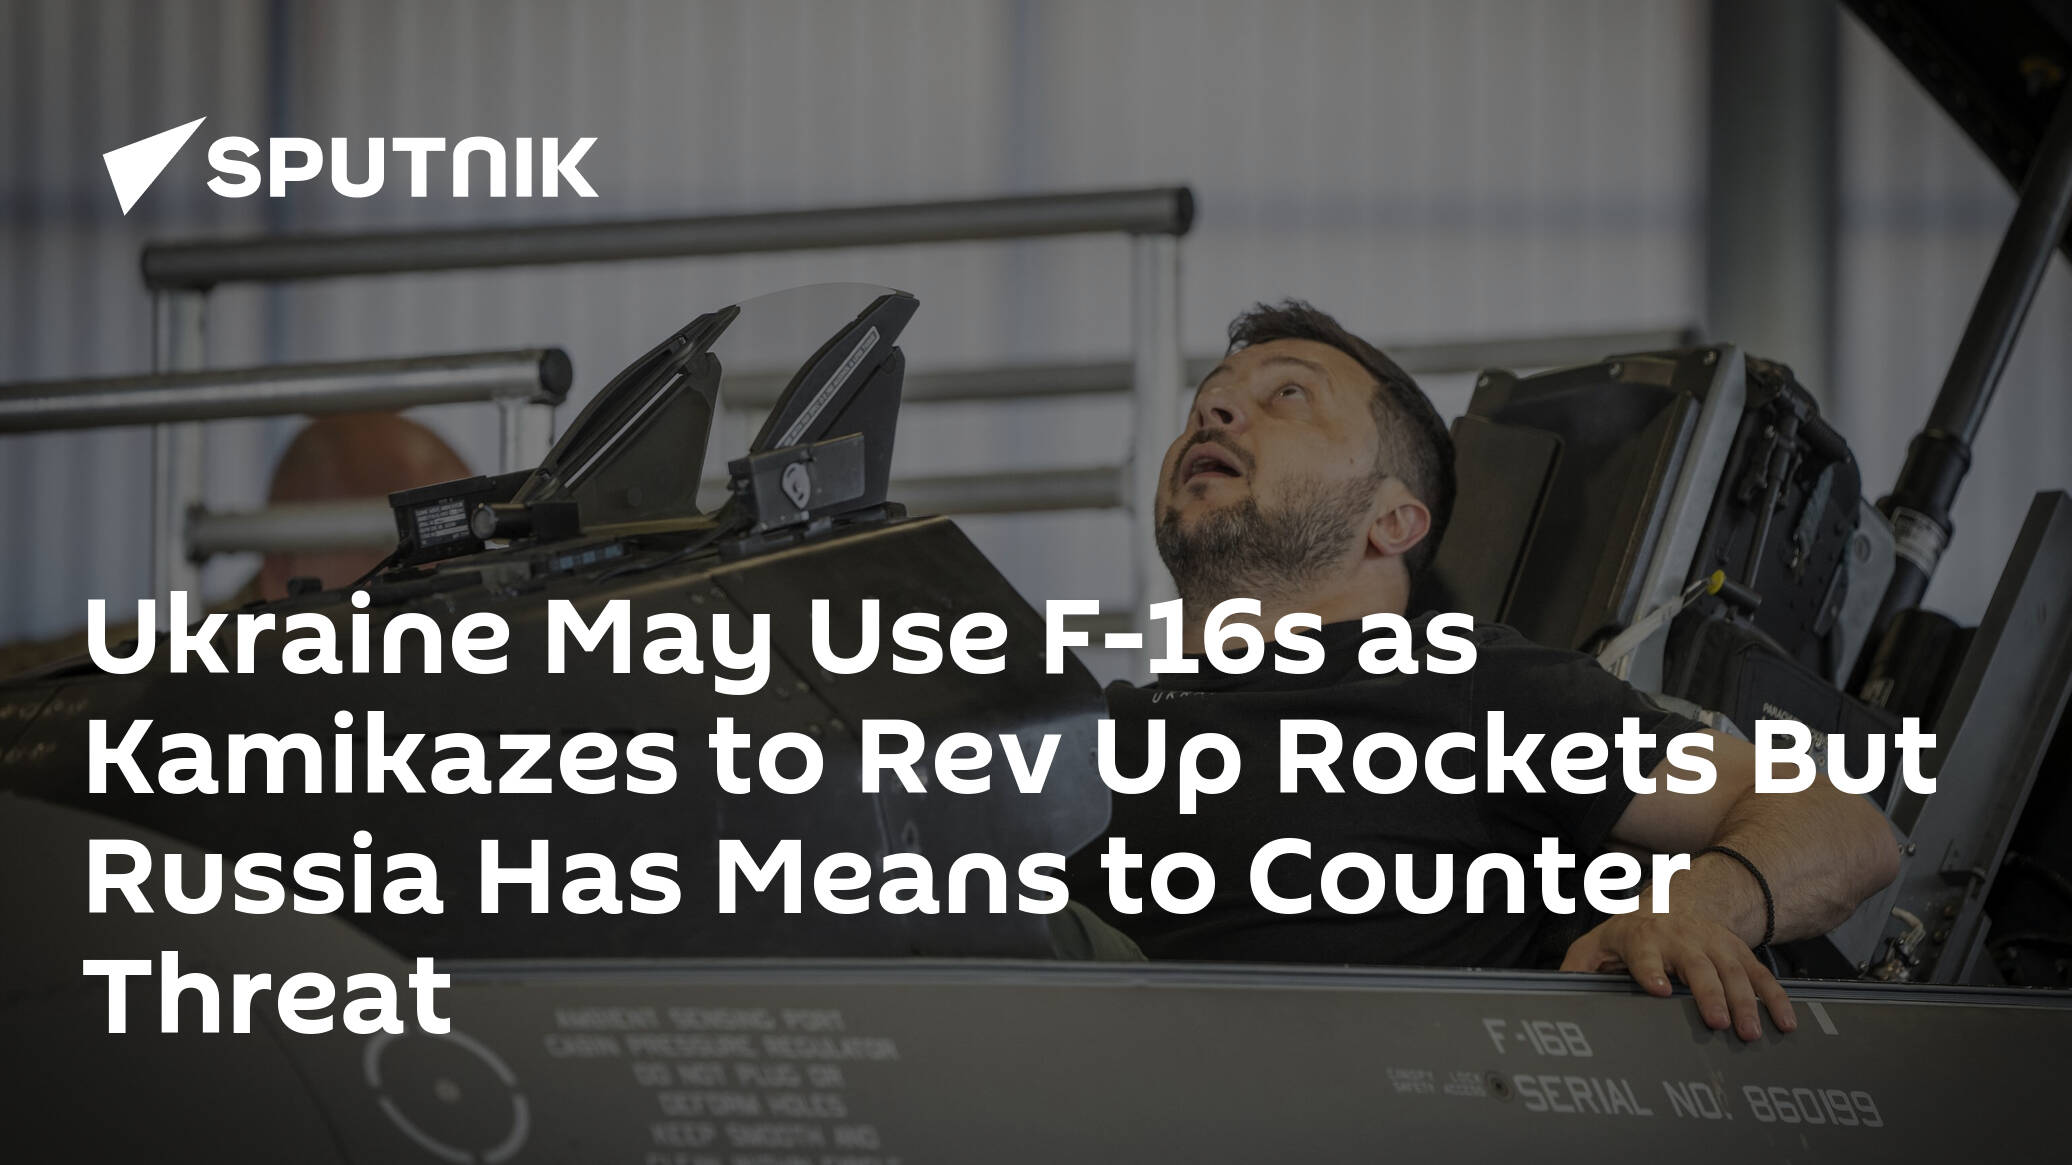 Ukraine May Use F-16s as Kamikazes to Rev Up Rockets